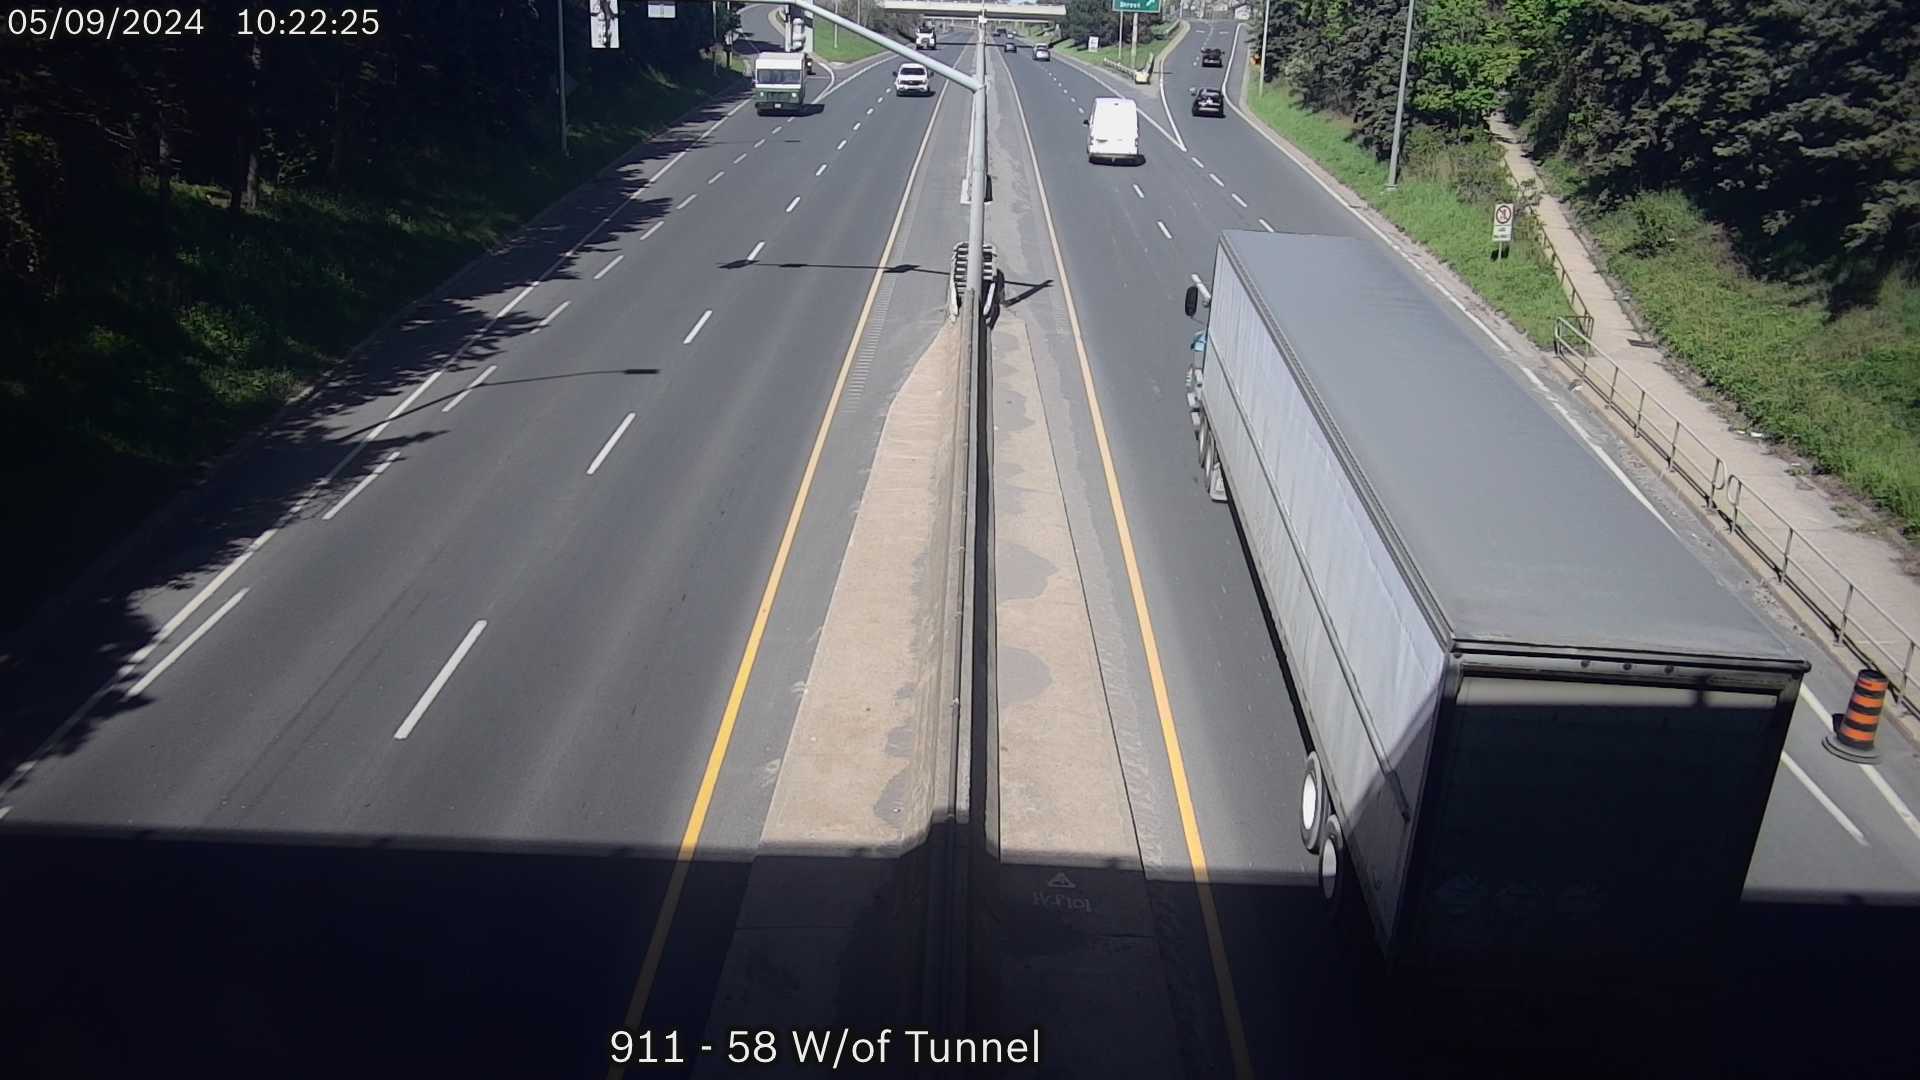 Traffic Camera EastBound Thorold Tunnel at the entrance